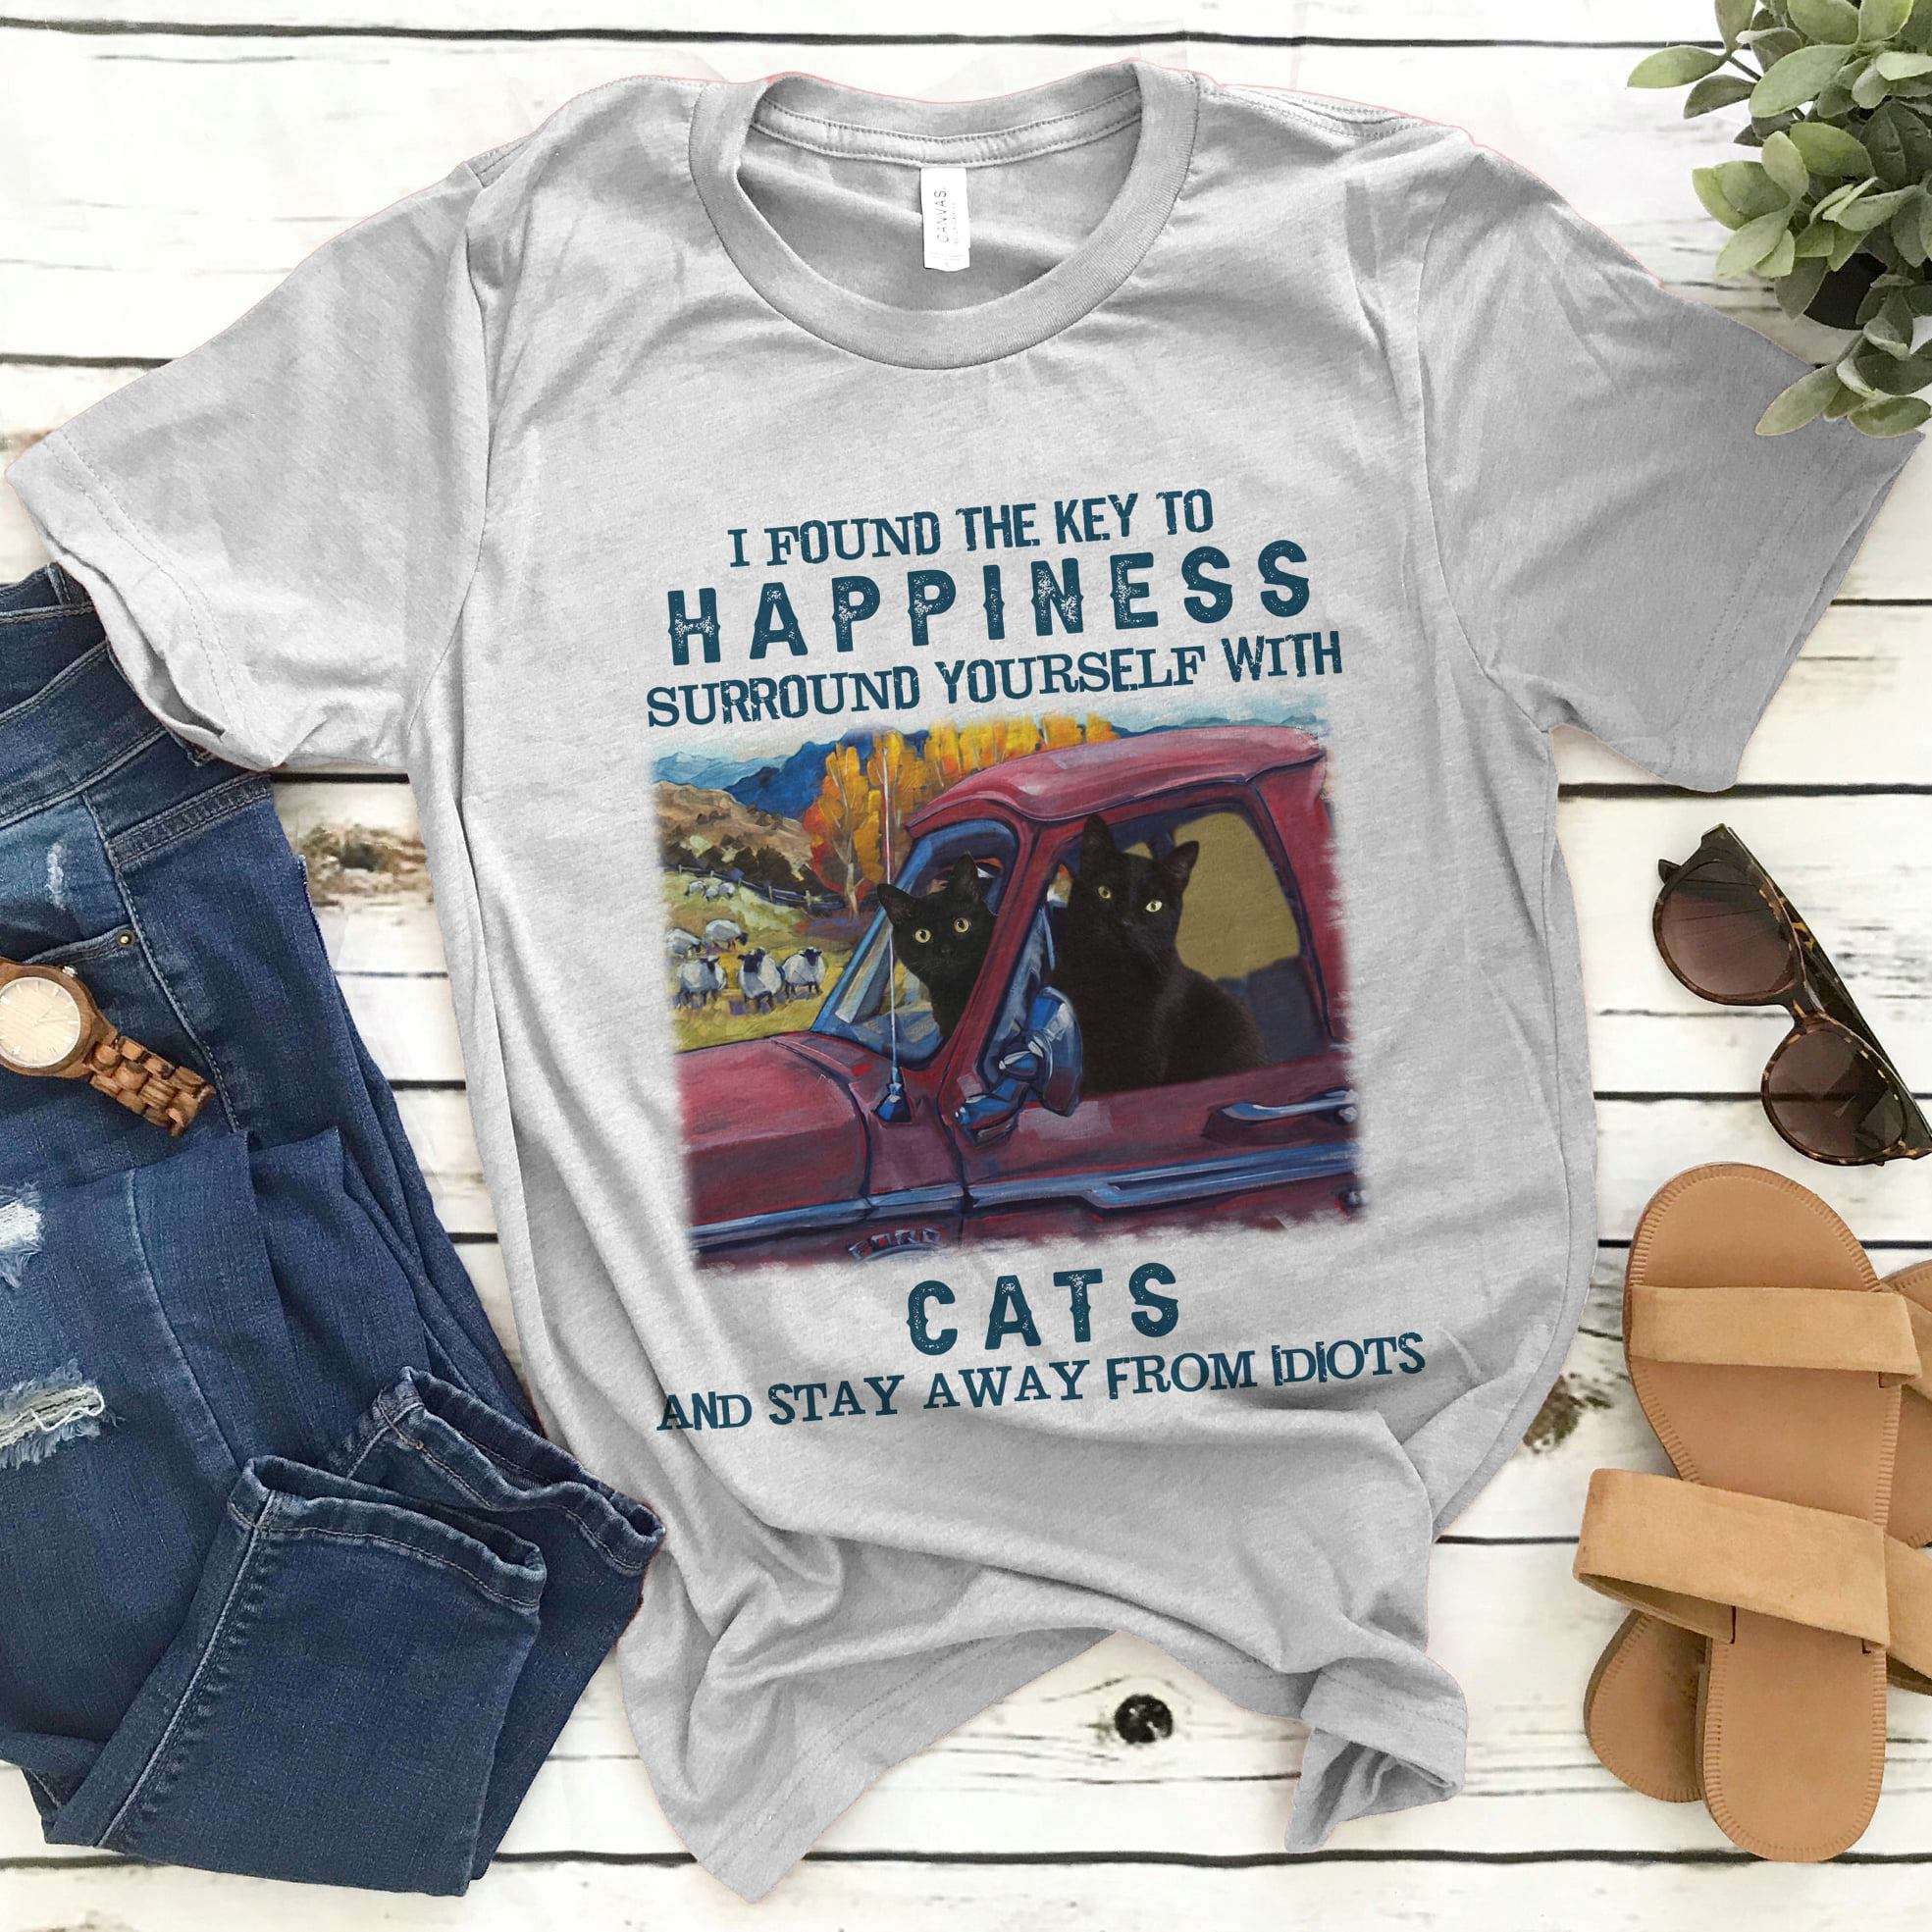 I found the key to happiness surround yourself with cats and stay away from idiots - Black cat on truck